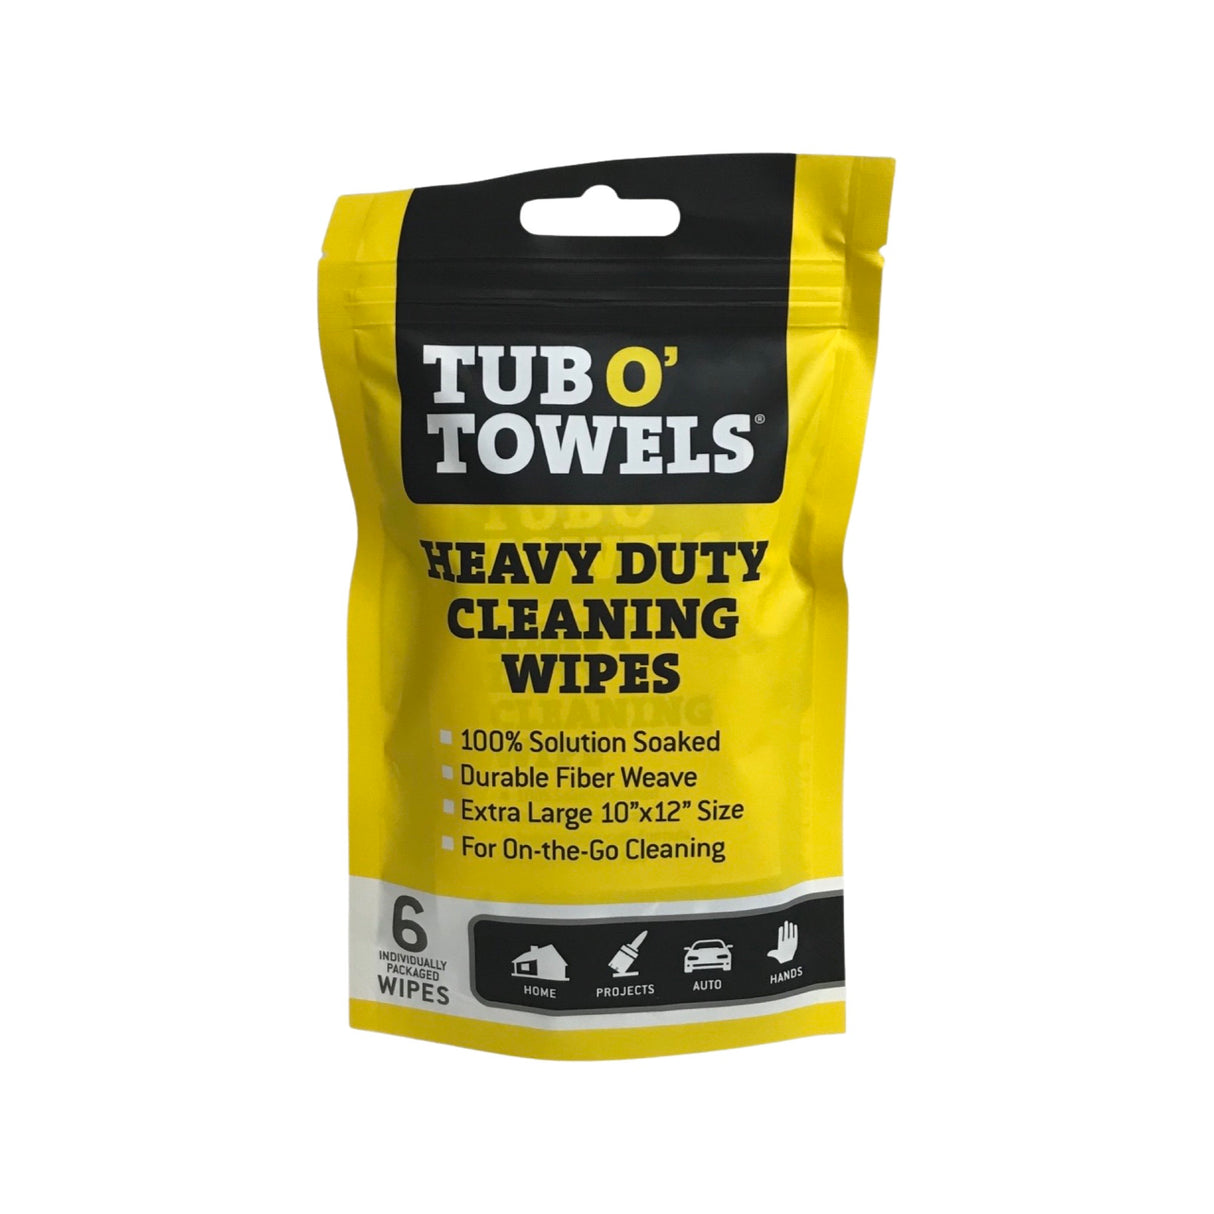 Tub O' Towels TW01-6 - 24 Pack Heavy Duty Multi-Surface Cleaning Wipes - Resealable